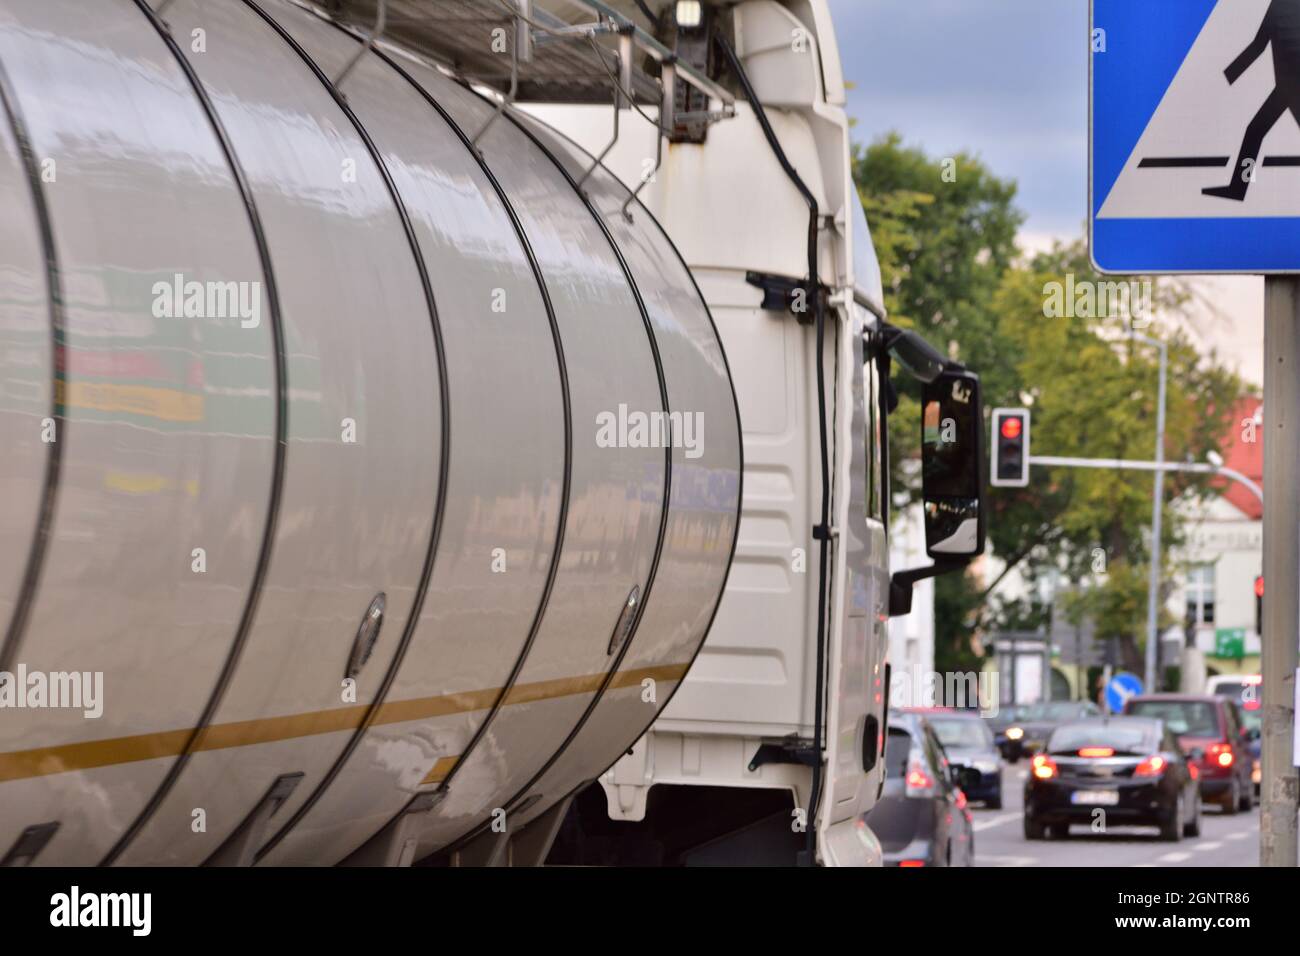 Tanker trucks are stuck in a traffic jam at a red light at an intersection. Intersection of light. Stock Photo